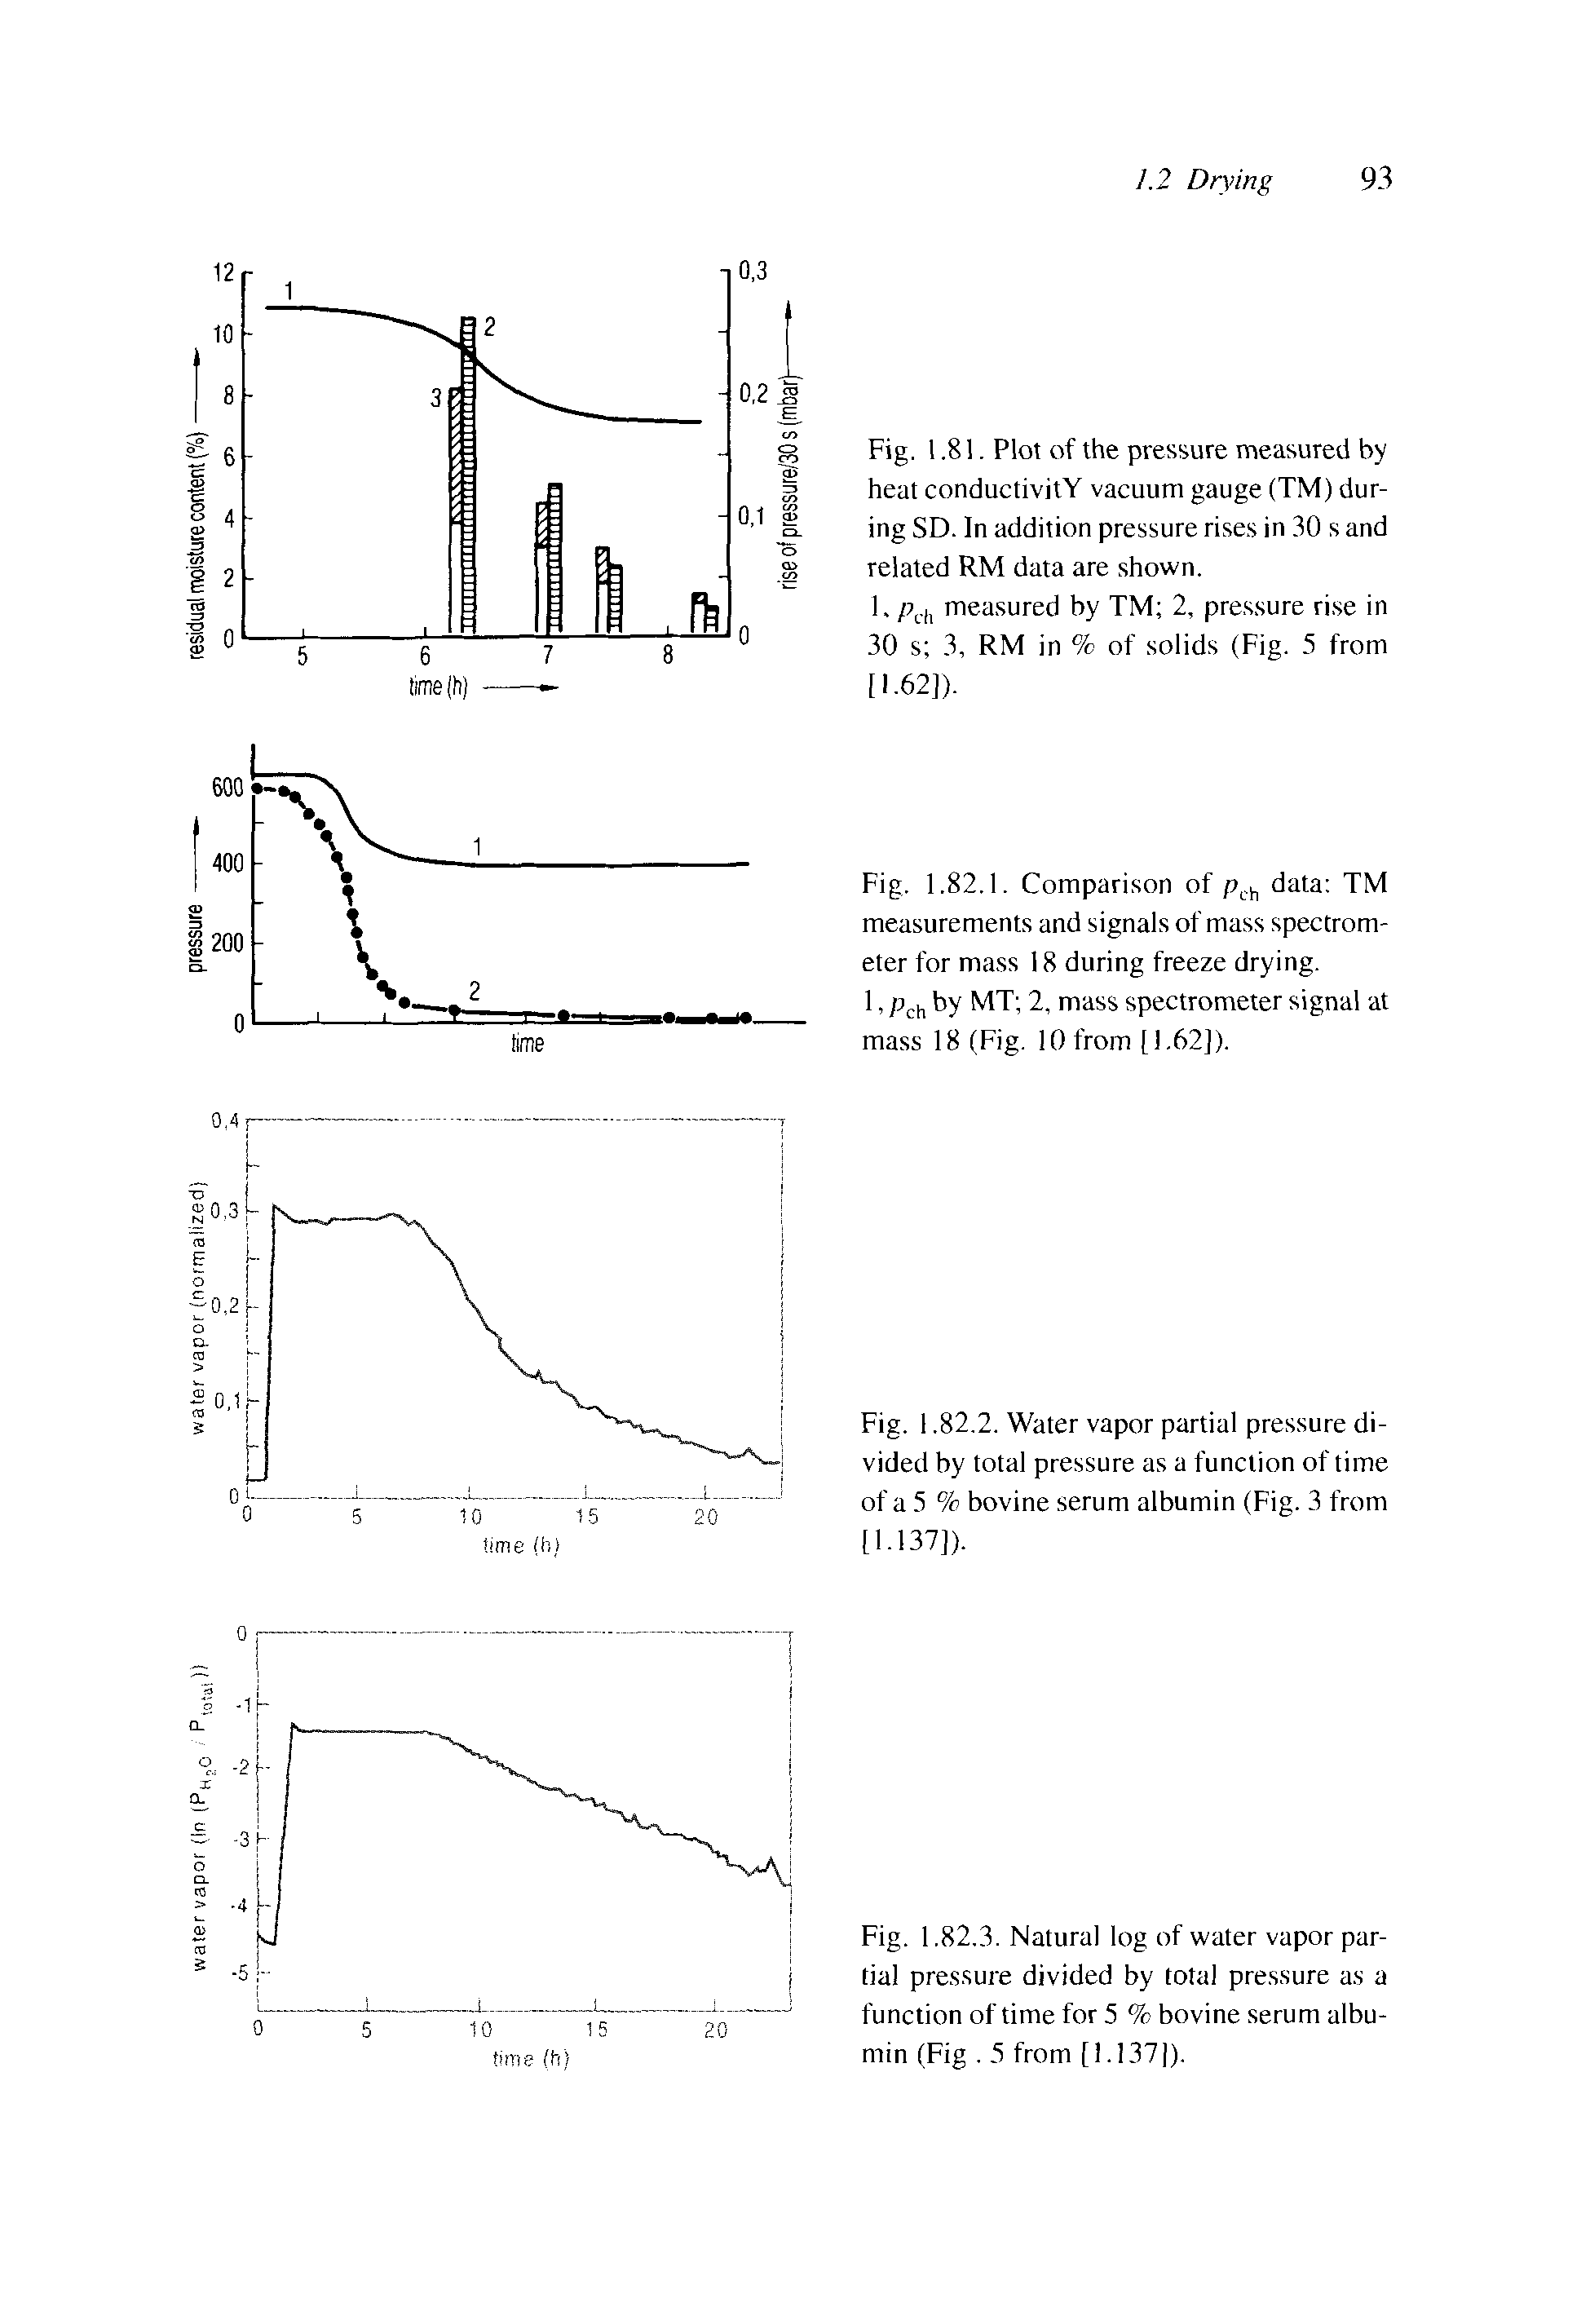 Fig. 1.82.2. Water vapor partial pressure divided by total pressure as a function of time of a 5 % bovine serum albumin (Fig. 3 from [1.137]).